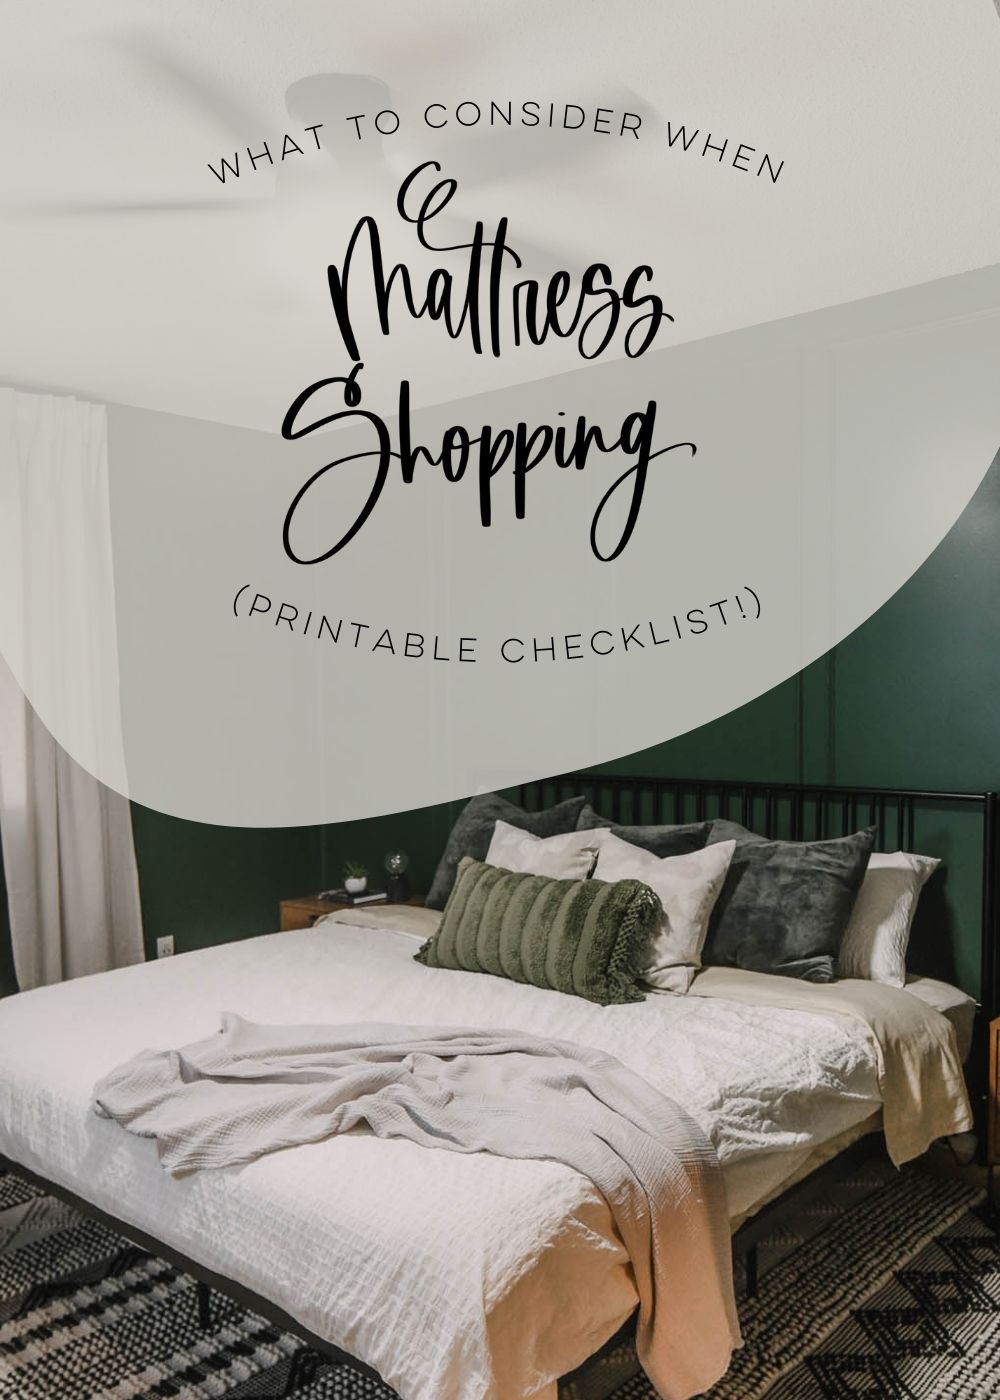 mattress shopping free printable checklist text overlay over photo of bedroom